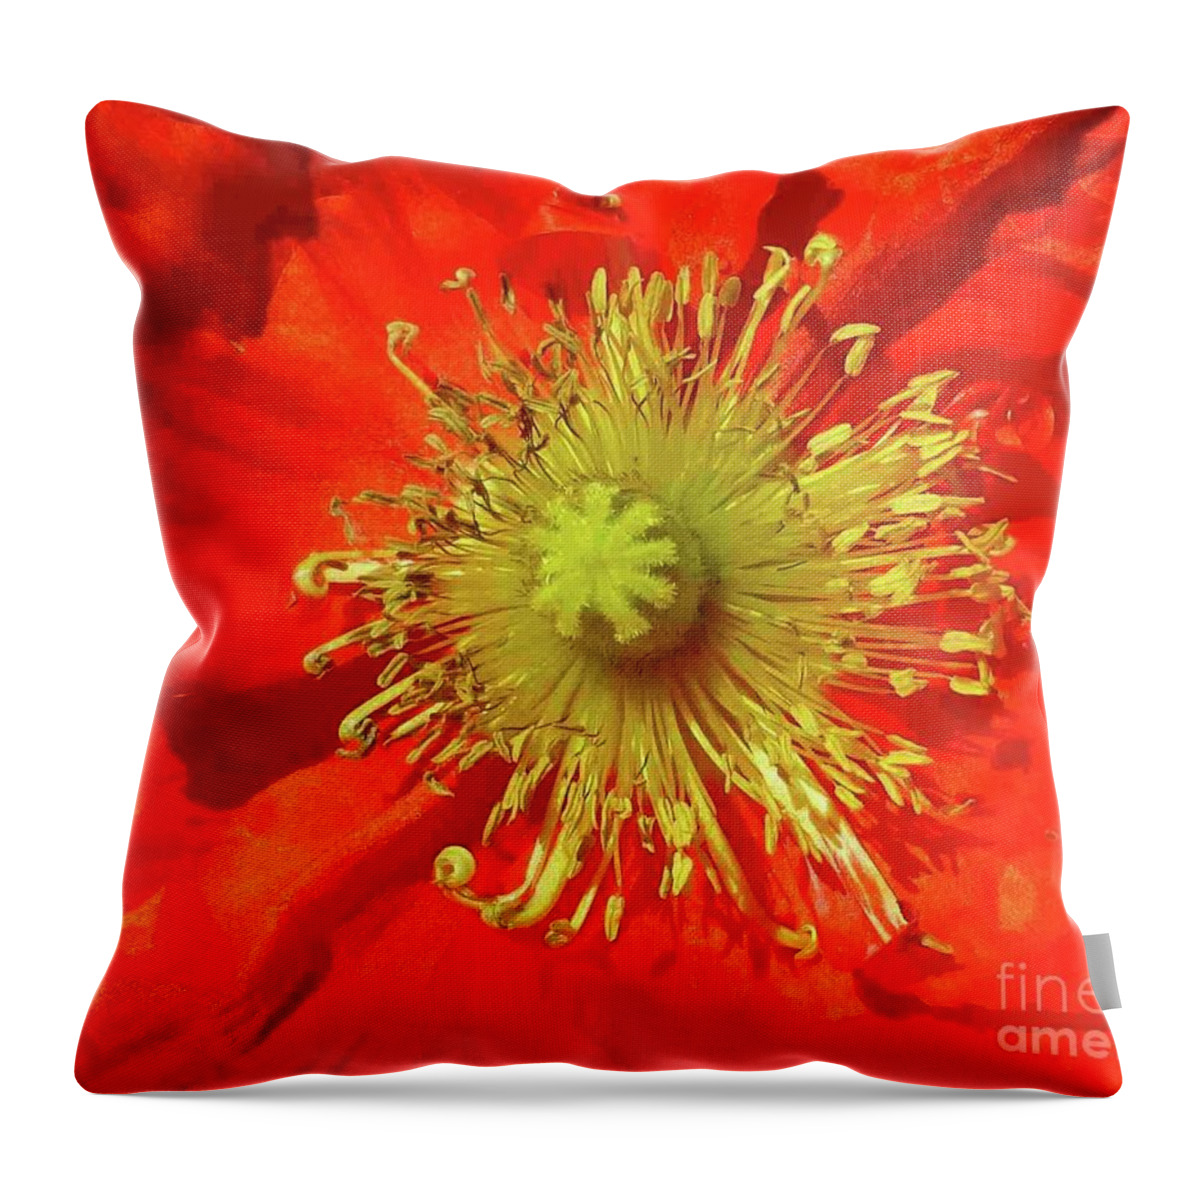 Poppy Throw Pillow featuring the photograph Poppy Glory by Barbie Corbett-Newmin